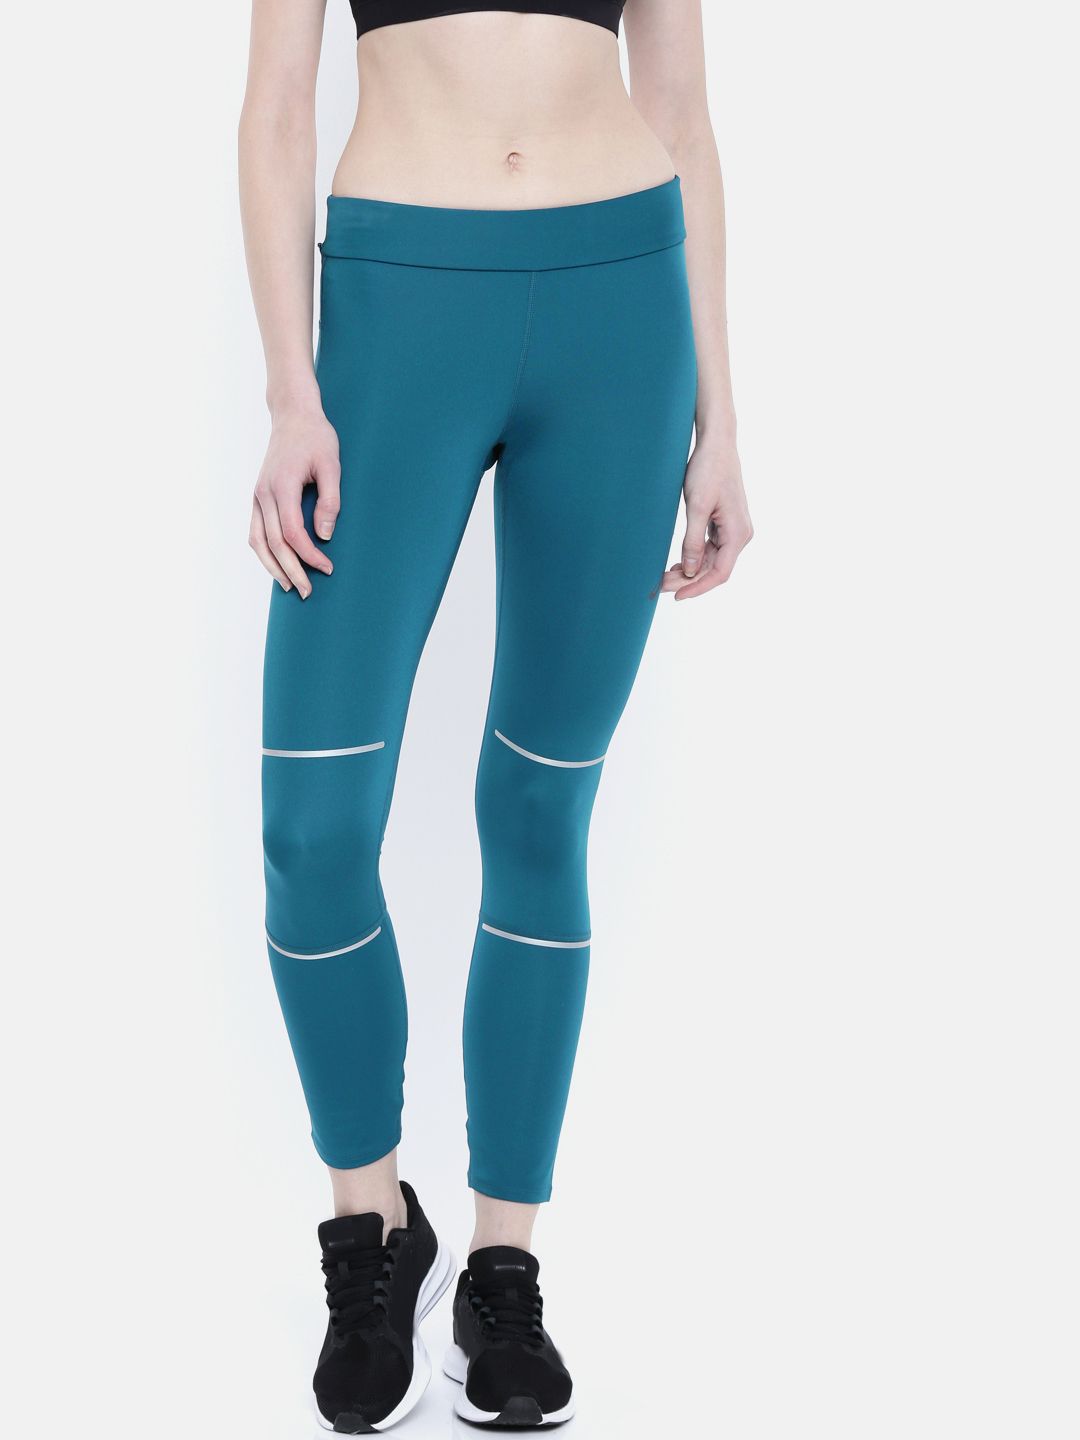 ASICS Women Teal Blue Solid LITE-SHOW 7/8 Tights Price in India